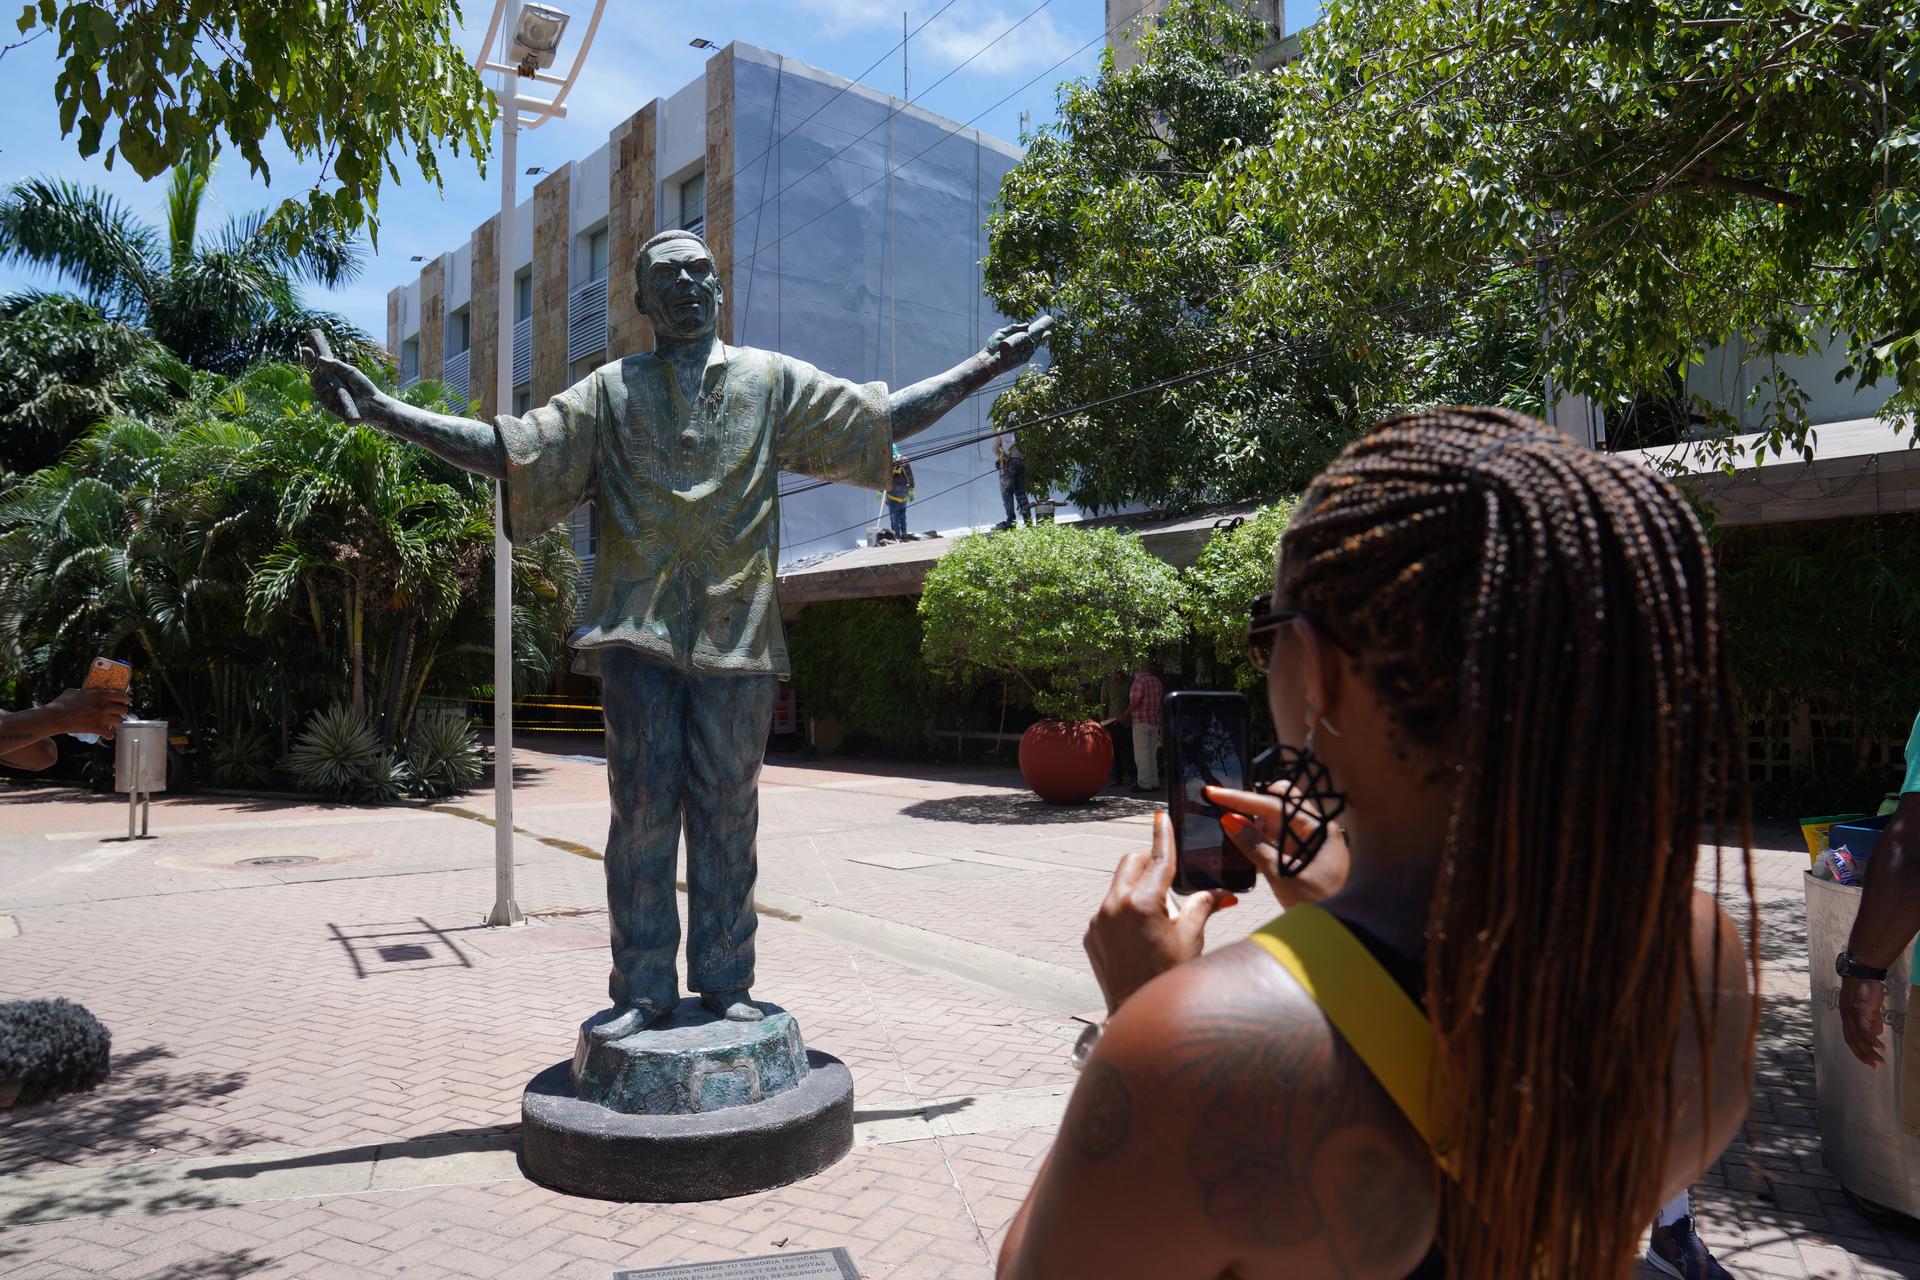 Rocha's tour passes by the statue of Joe Arroyo, one of Colombia's most famous musicians